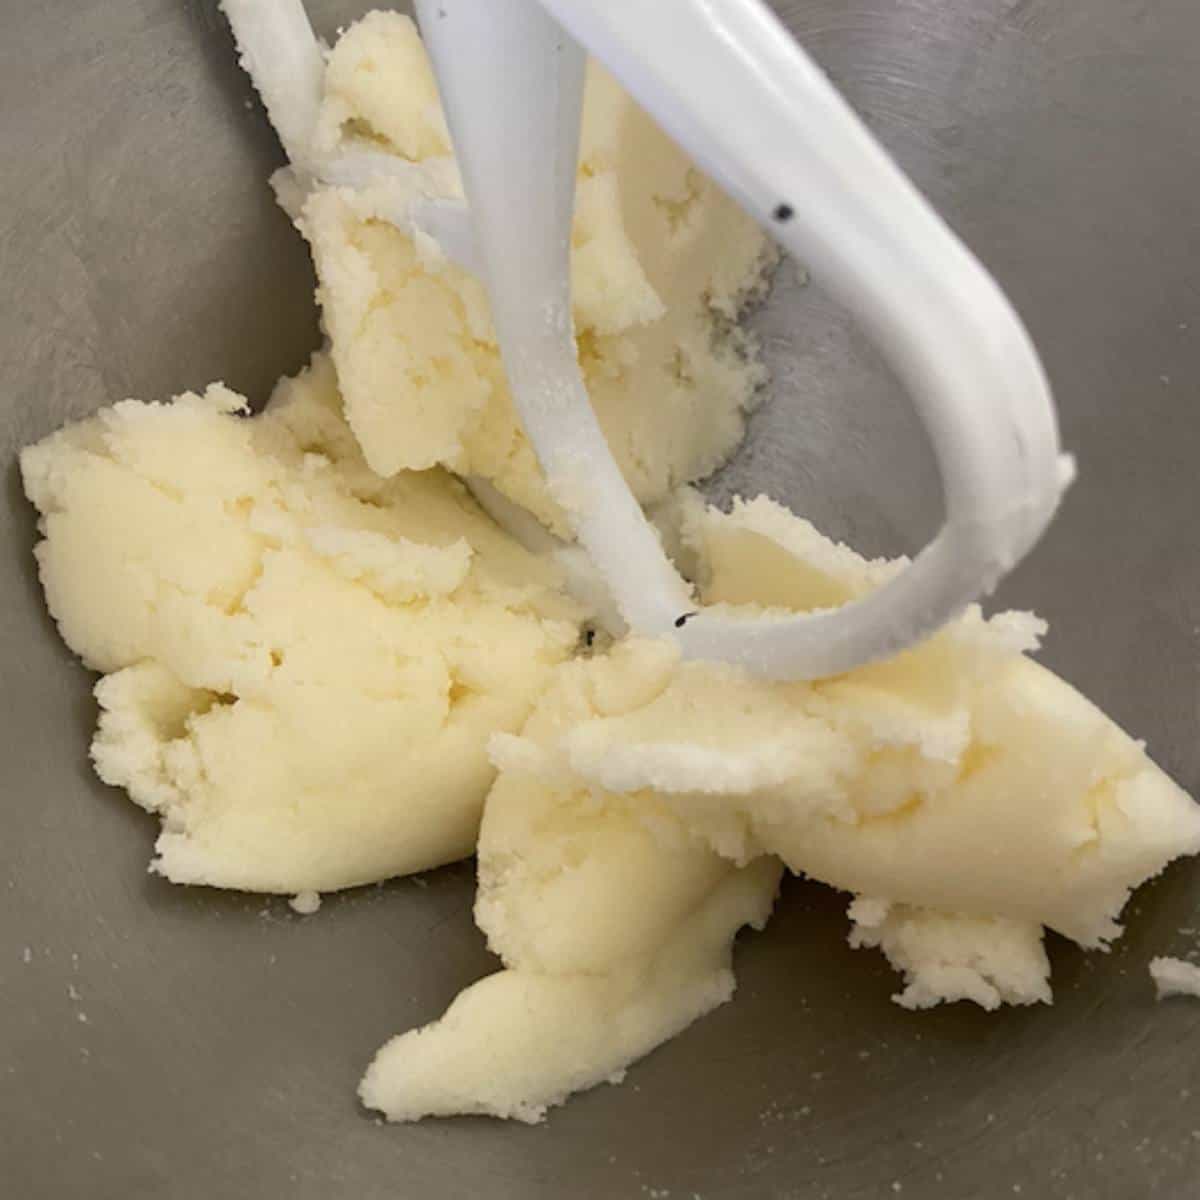 Sugar and butter creaming in stand mixer.